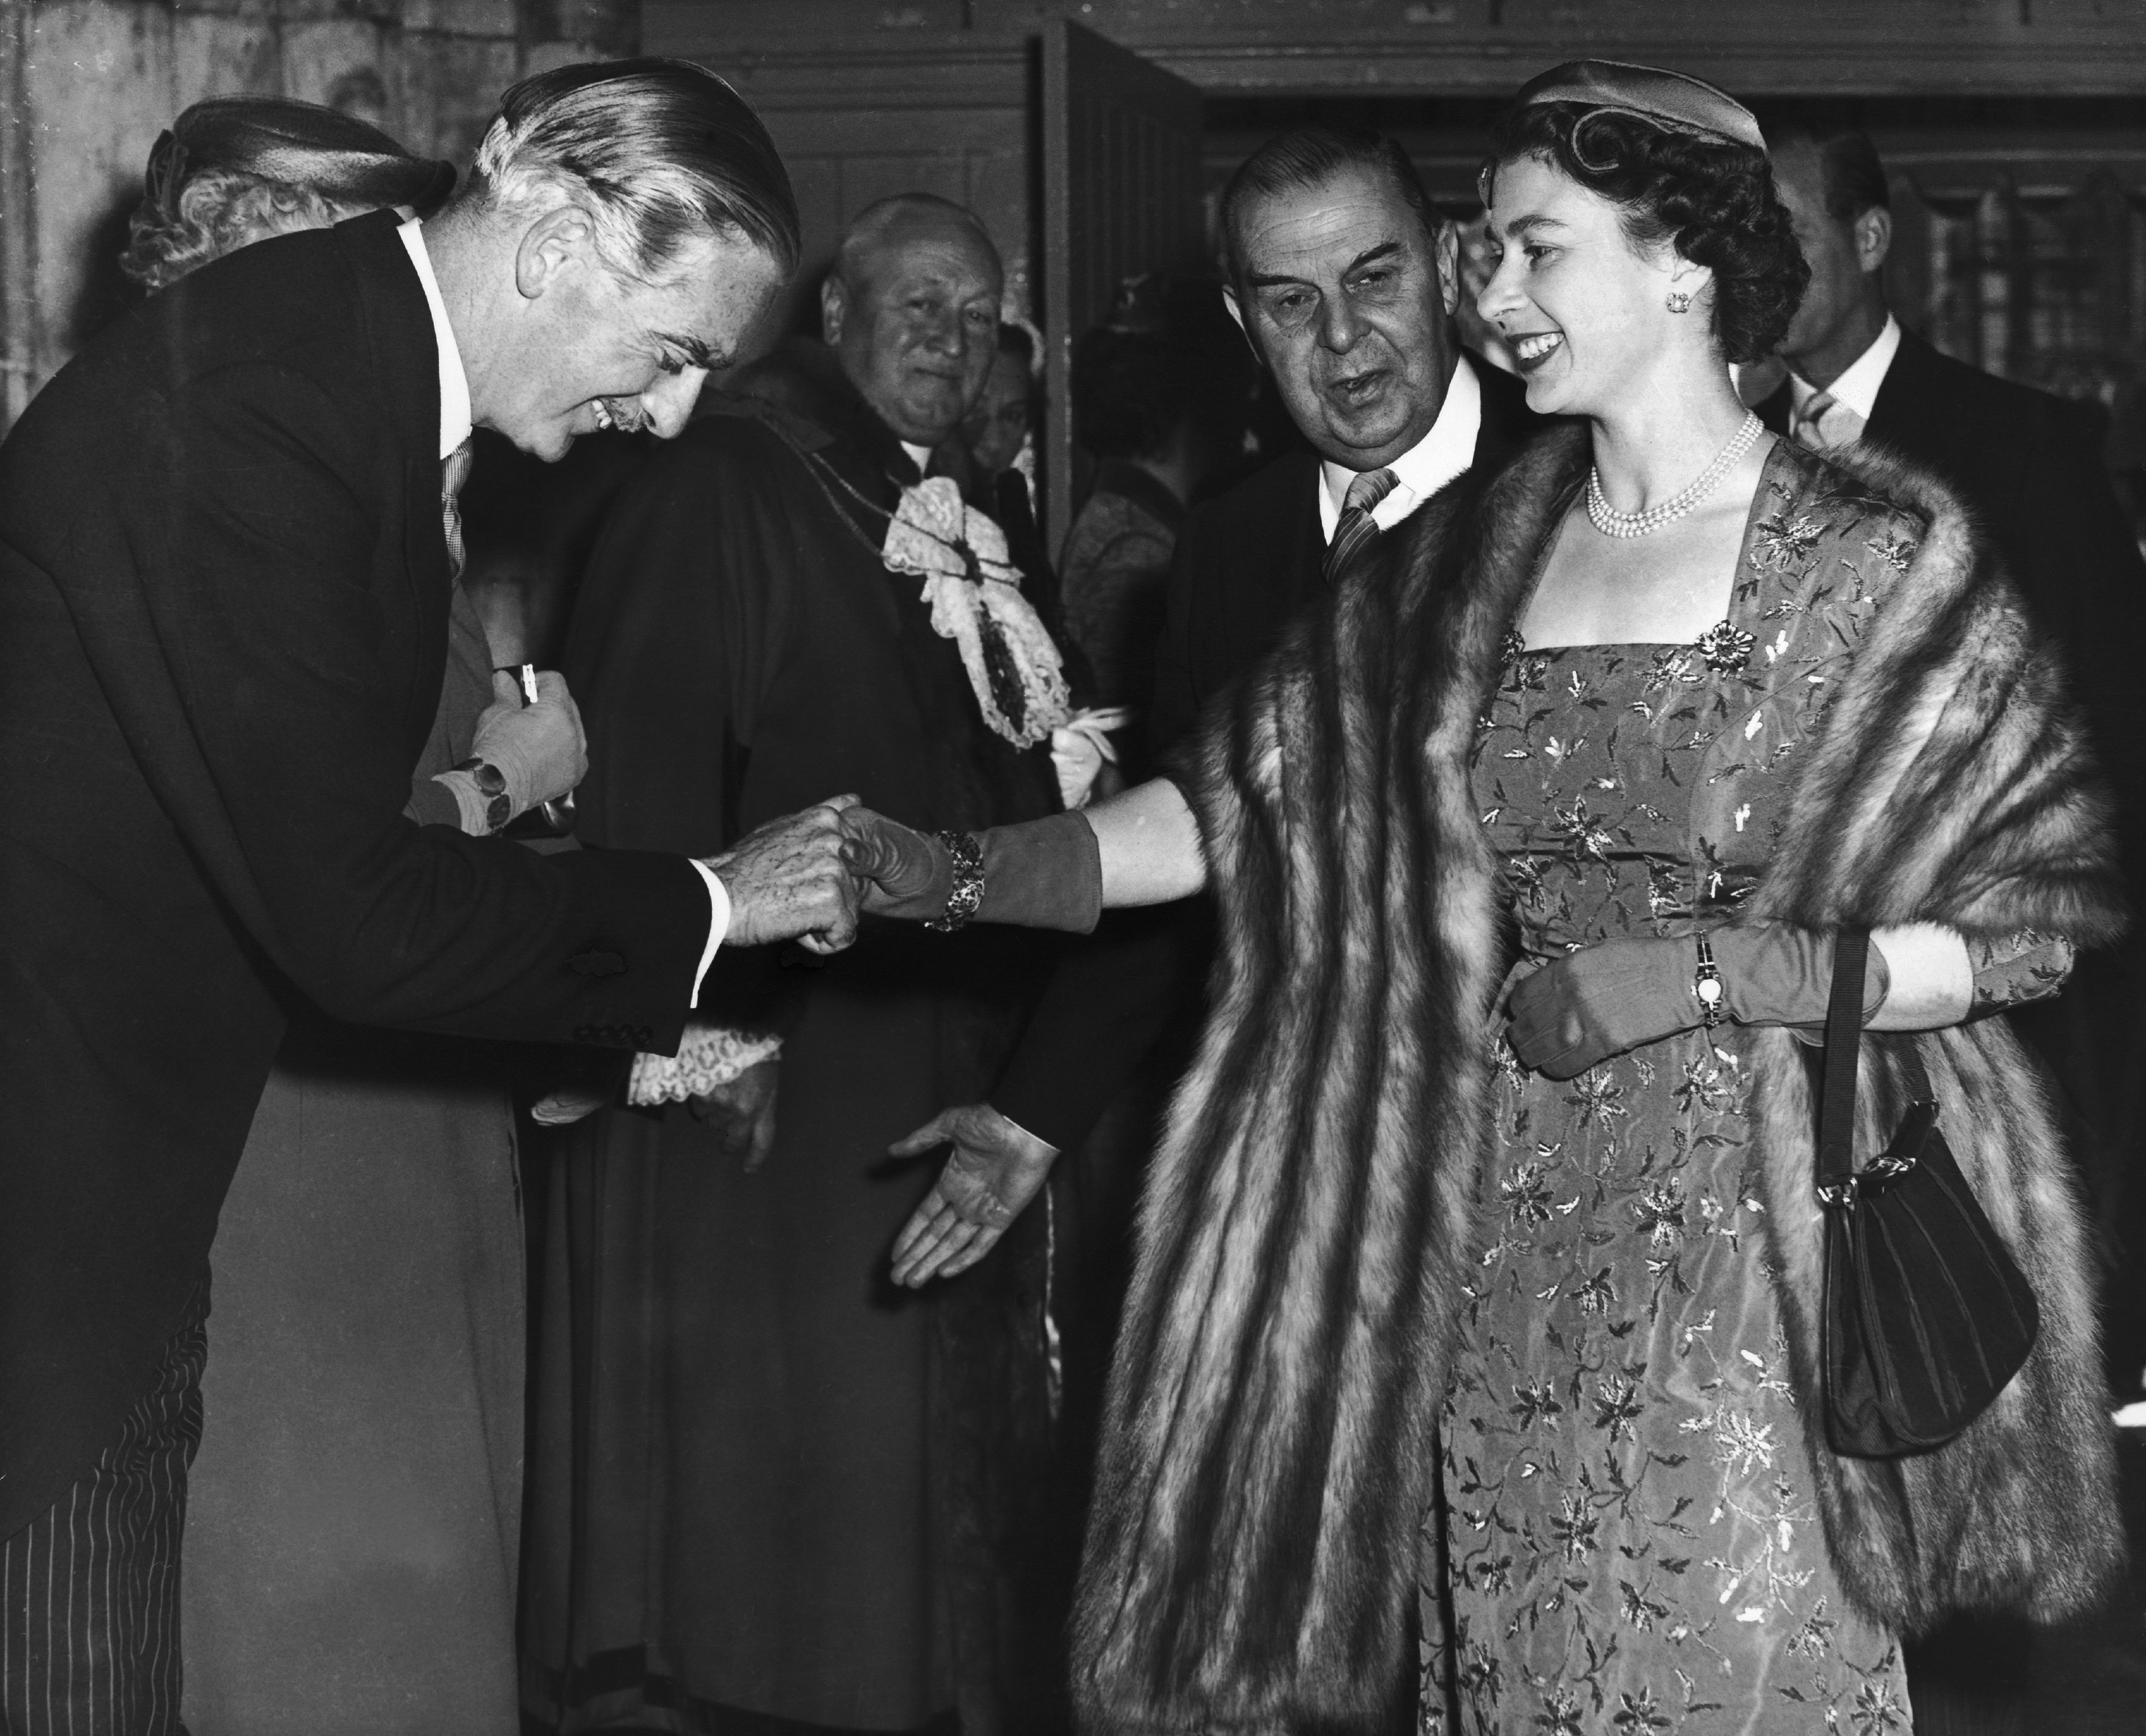 Queen Elizabeth II shakes hands with Prime Minister Sir Anthony Eden. Photo: Keystone-France/Gamma-Keystone via Getty Images